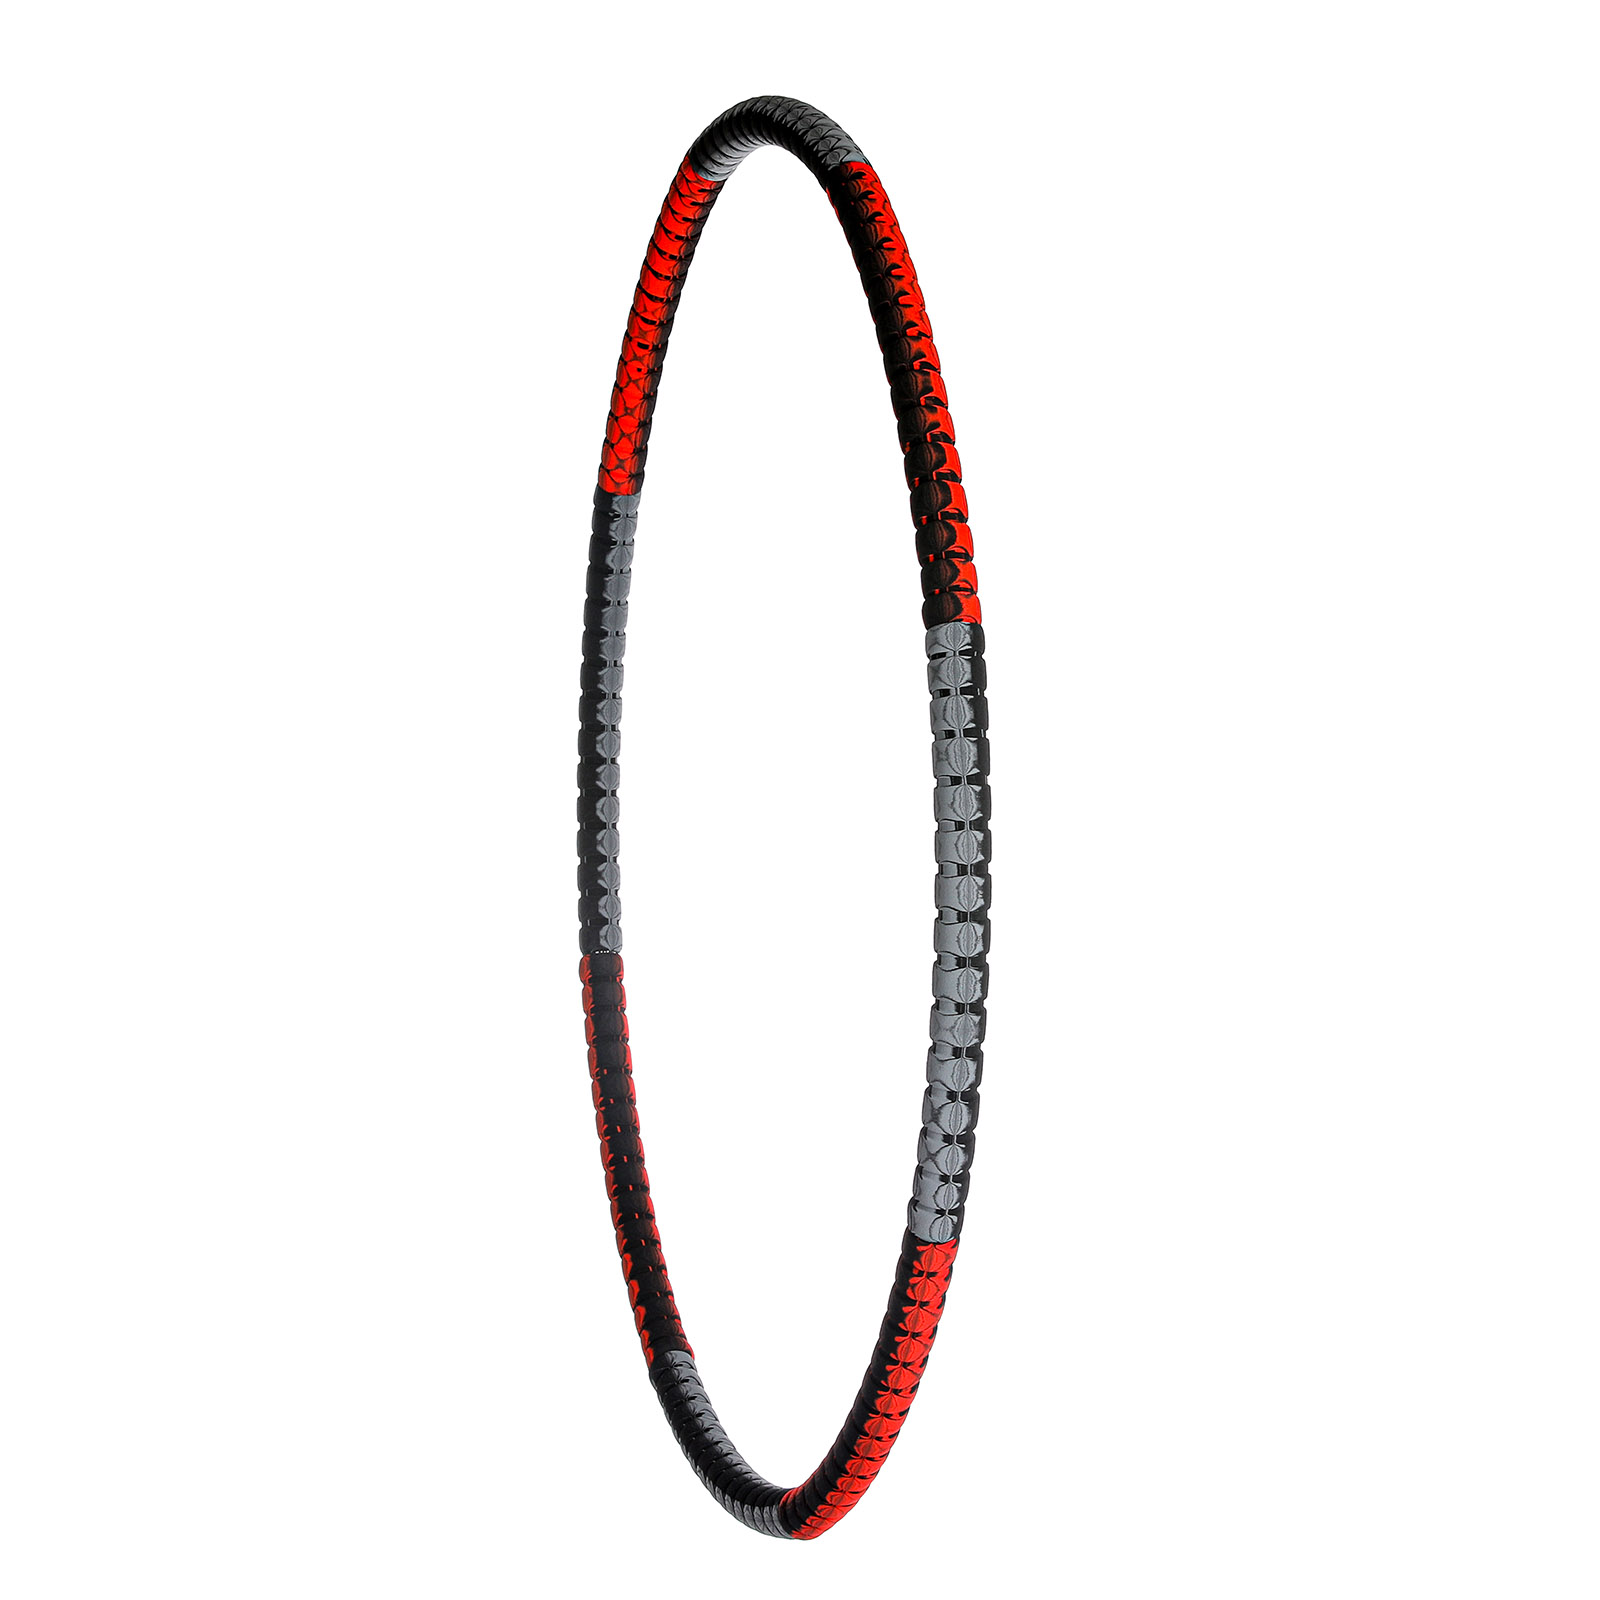 85cm-Fitness-Sport-Hoops-8-Section-Removable-Slimming-Hoops-Exercise-Yoga-Bodybuilding-Equipment-Hom-1887281-8